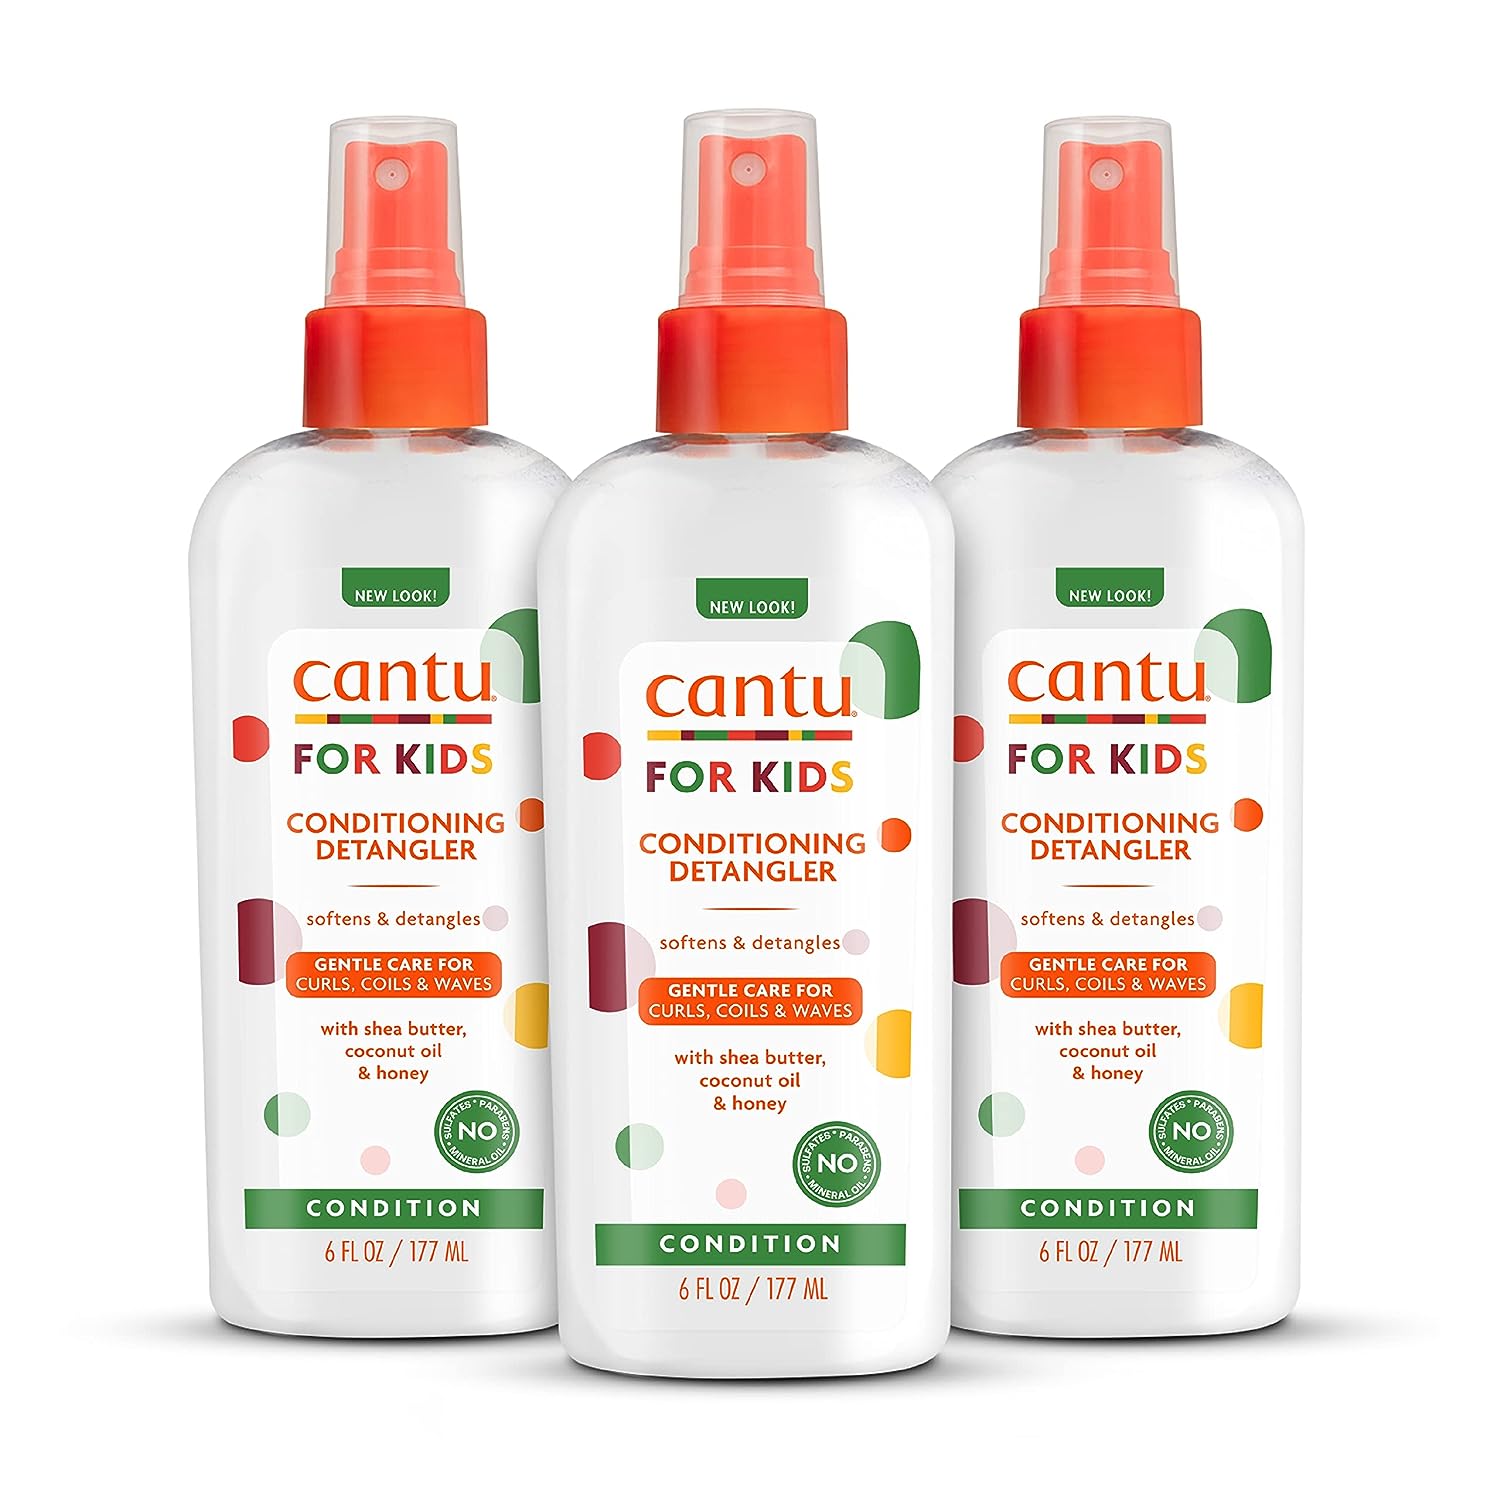 Cantu Care for Kids Paraben & Sulfate-Free [...]